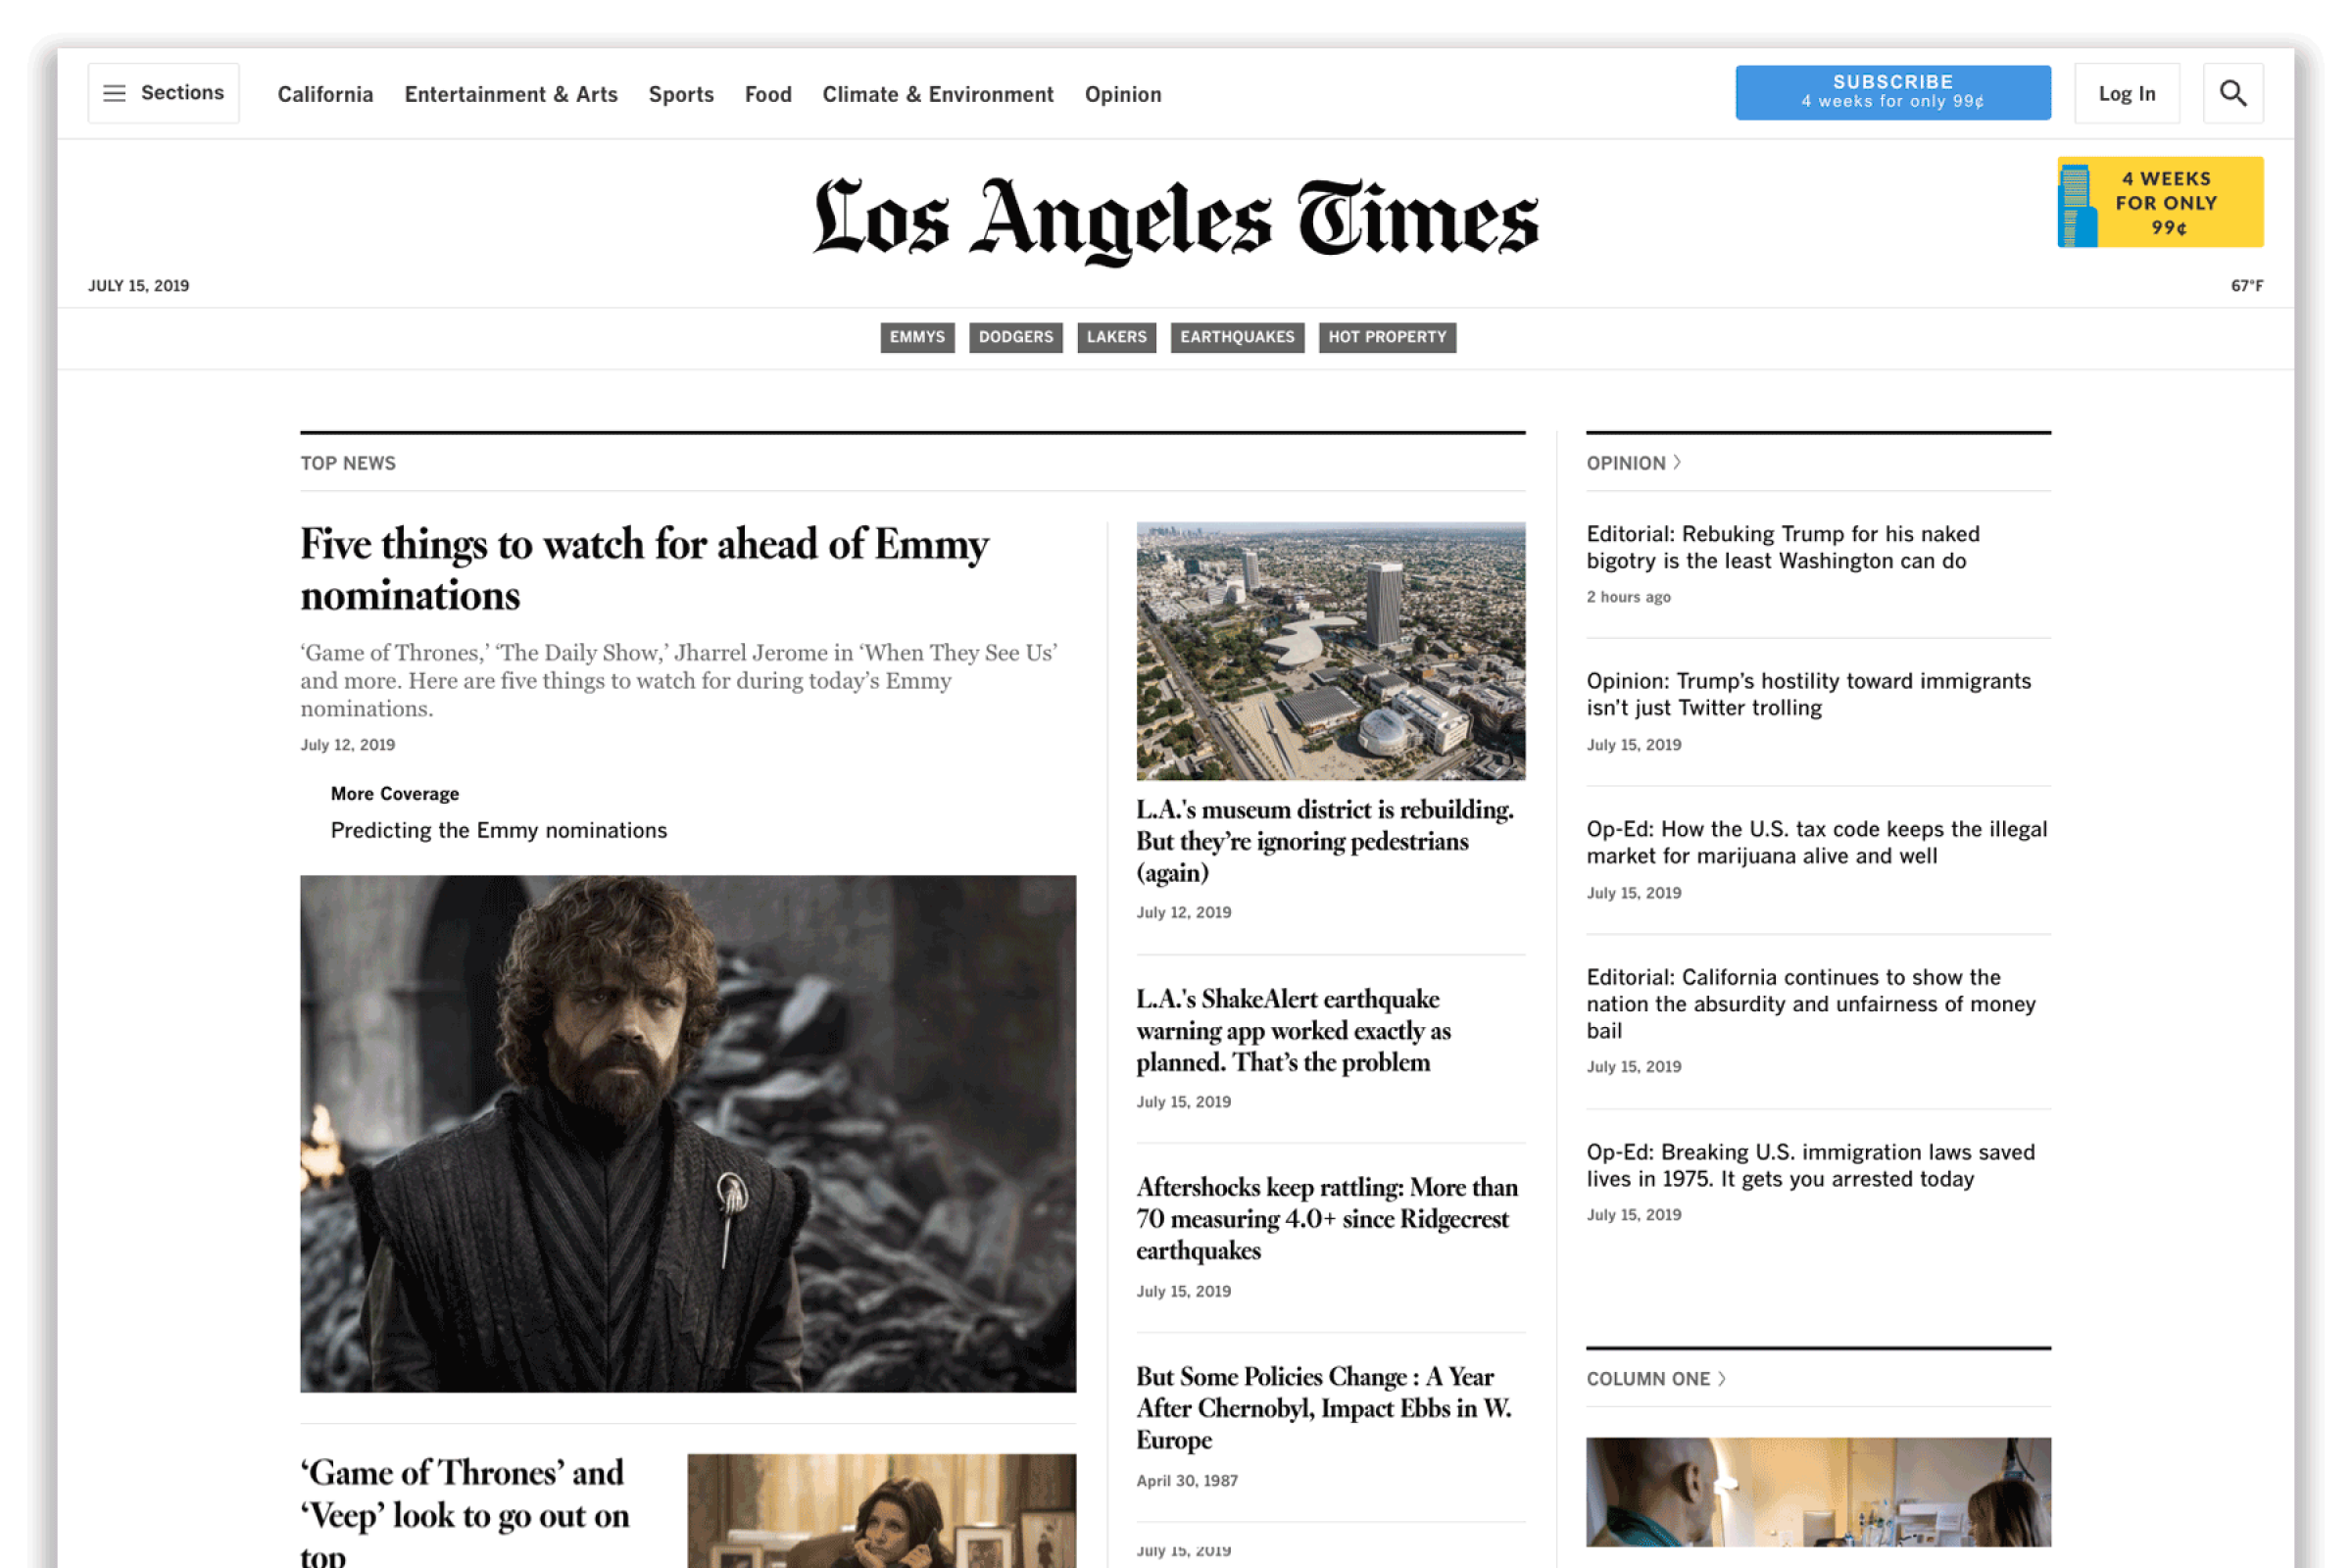 Introducing a new latimes.com powered by GrapheneCMS - Los Angeles Times